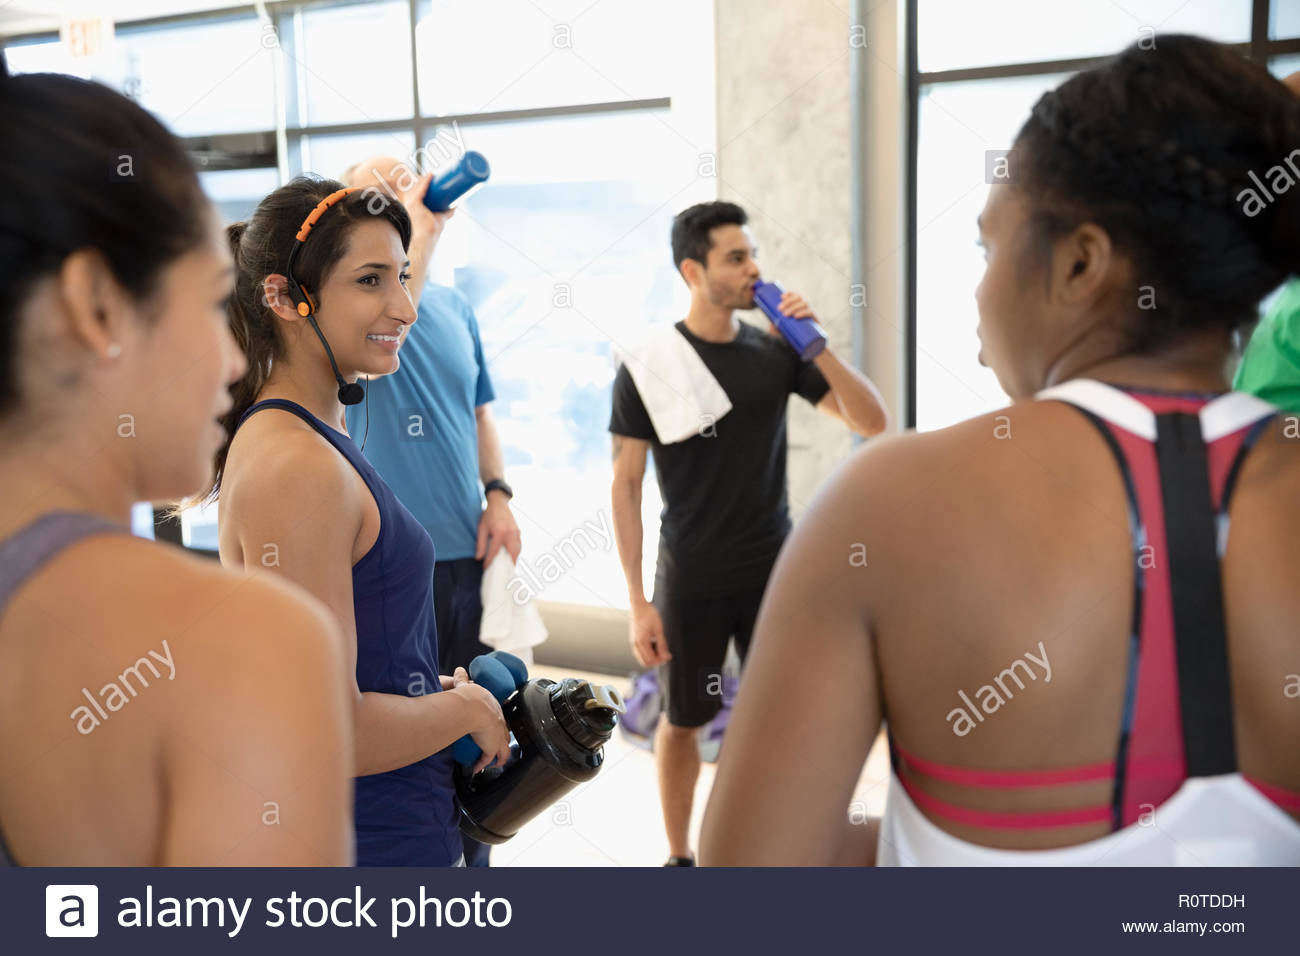 Women talking after group exercise class in gym Stock Photo